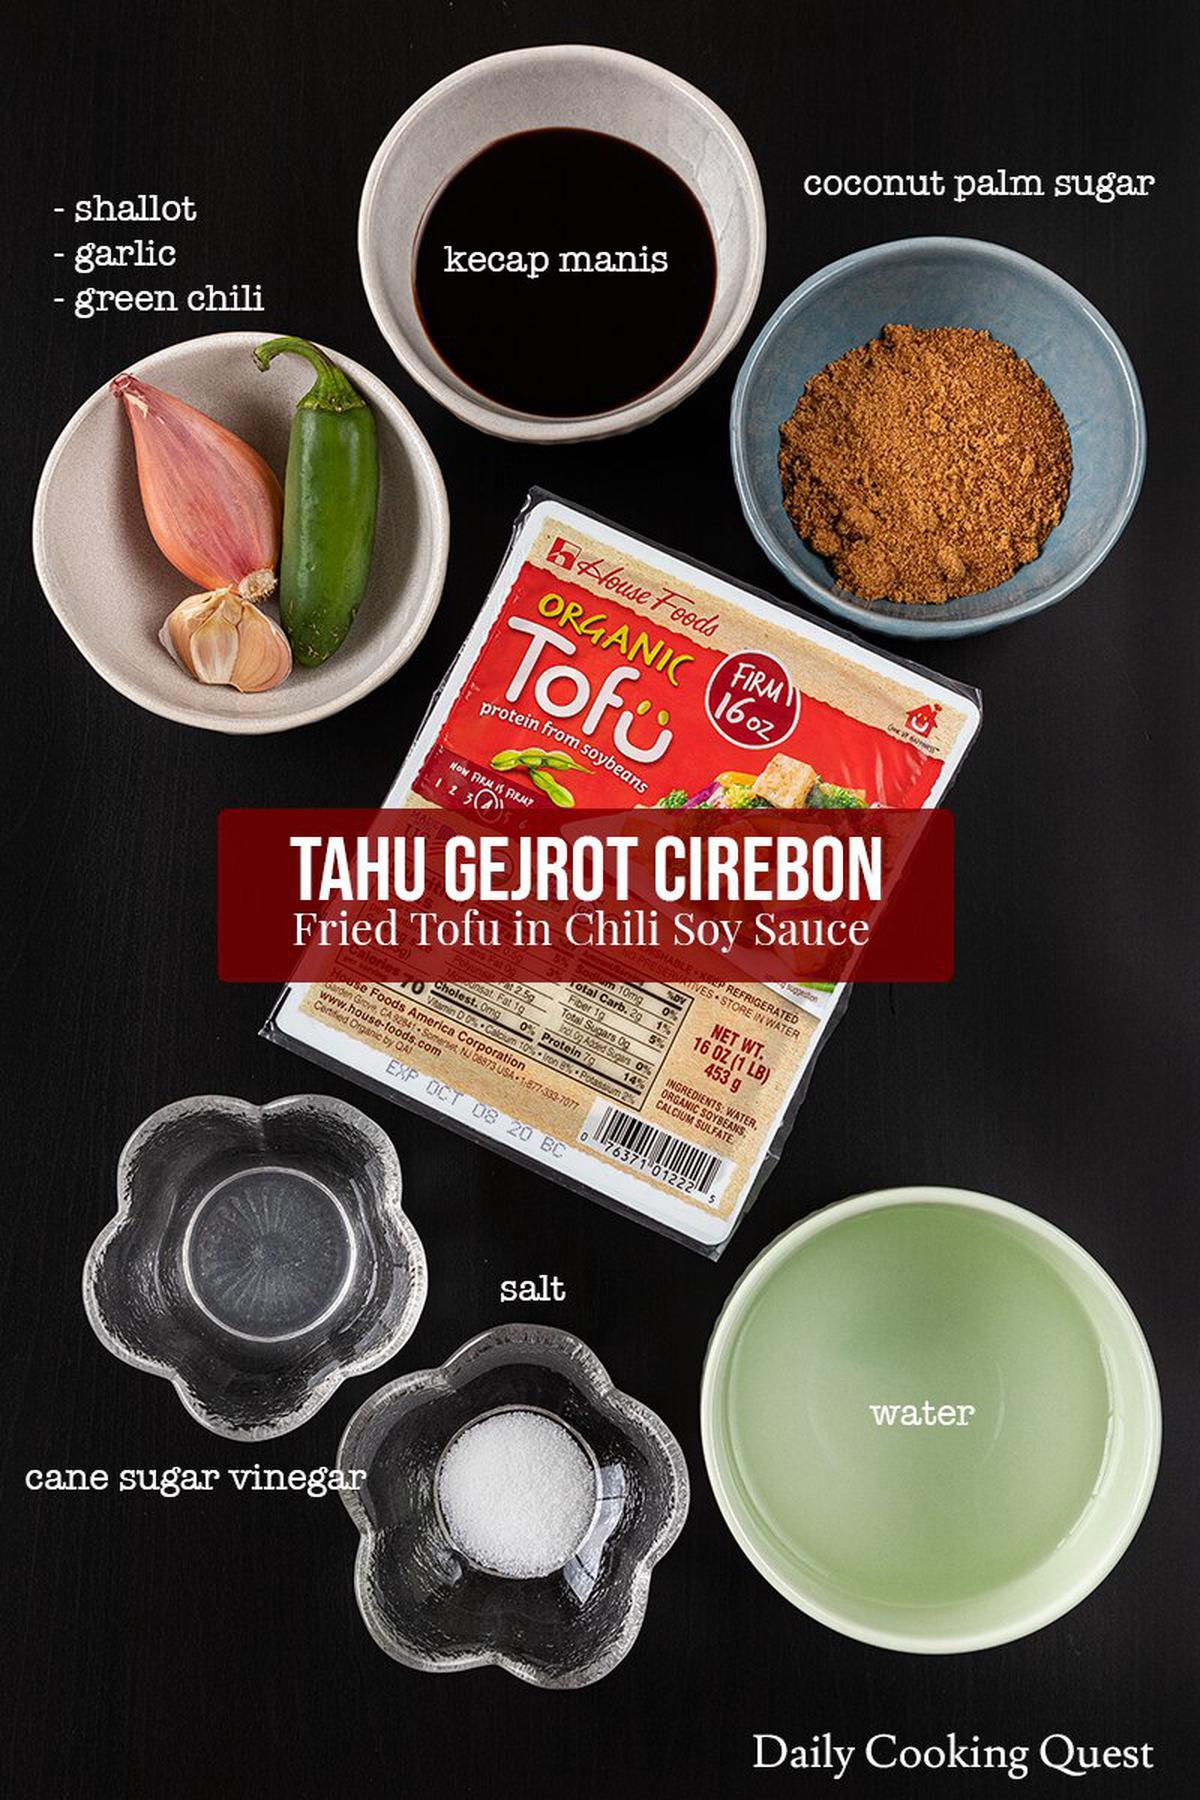 Tahu Gejrot Cirebon - Fried Tofu in Chili Soy Sauce | Daily Cooking Quest